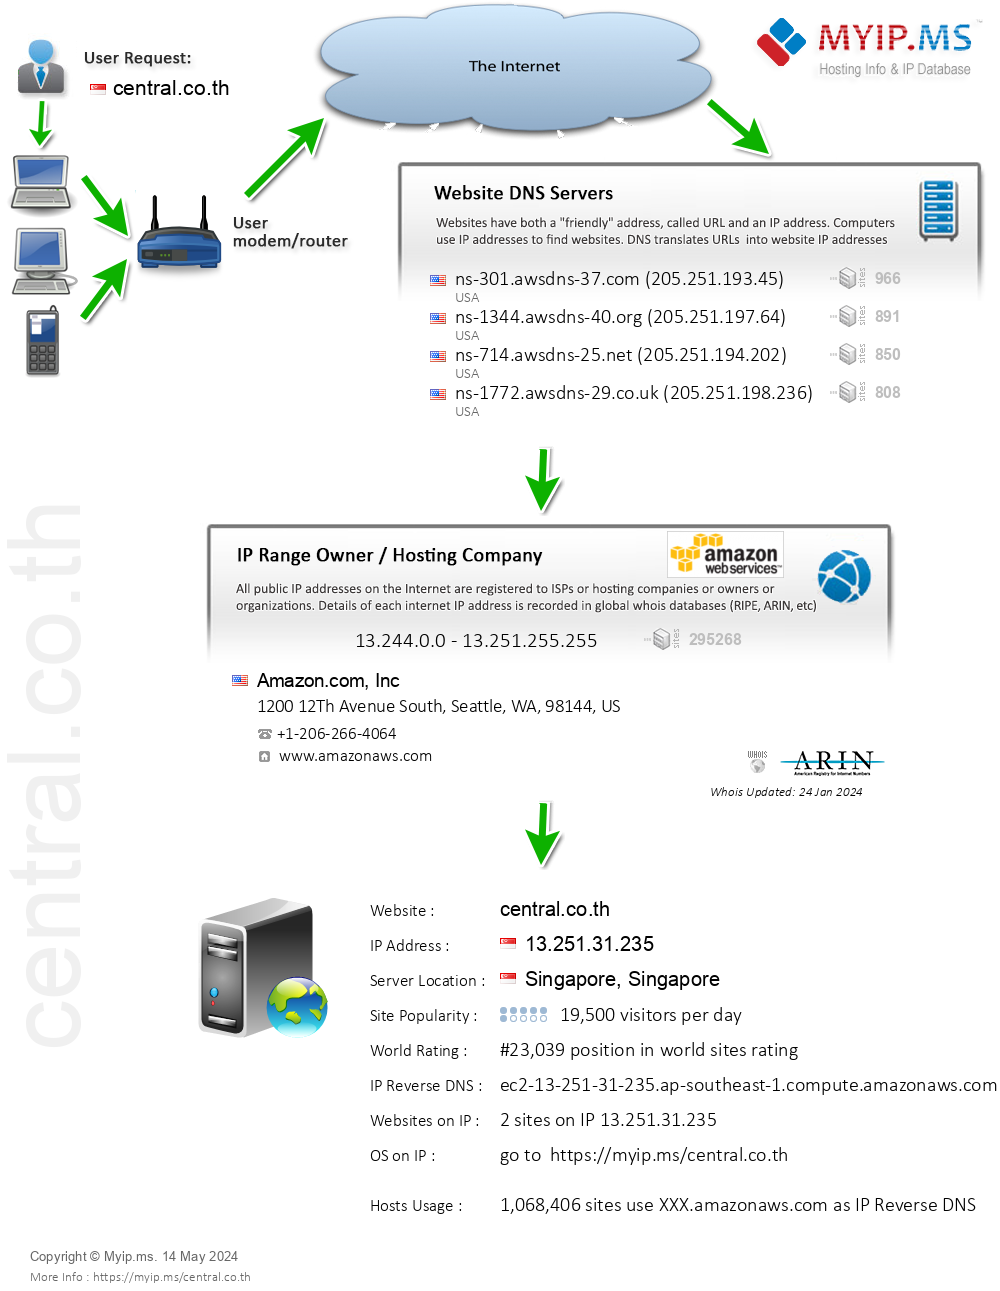 Central.co.th - Website Hosting Visual IP Diagram